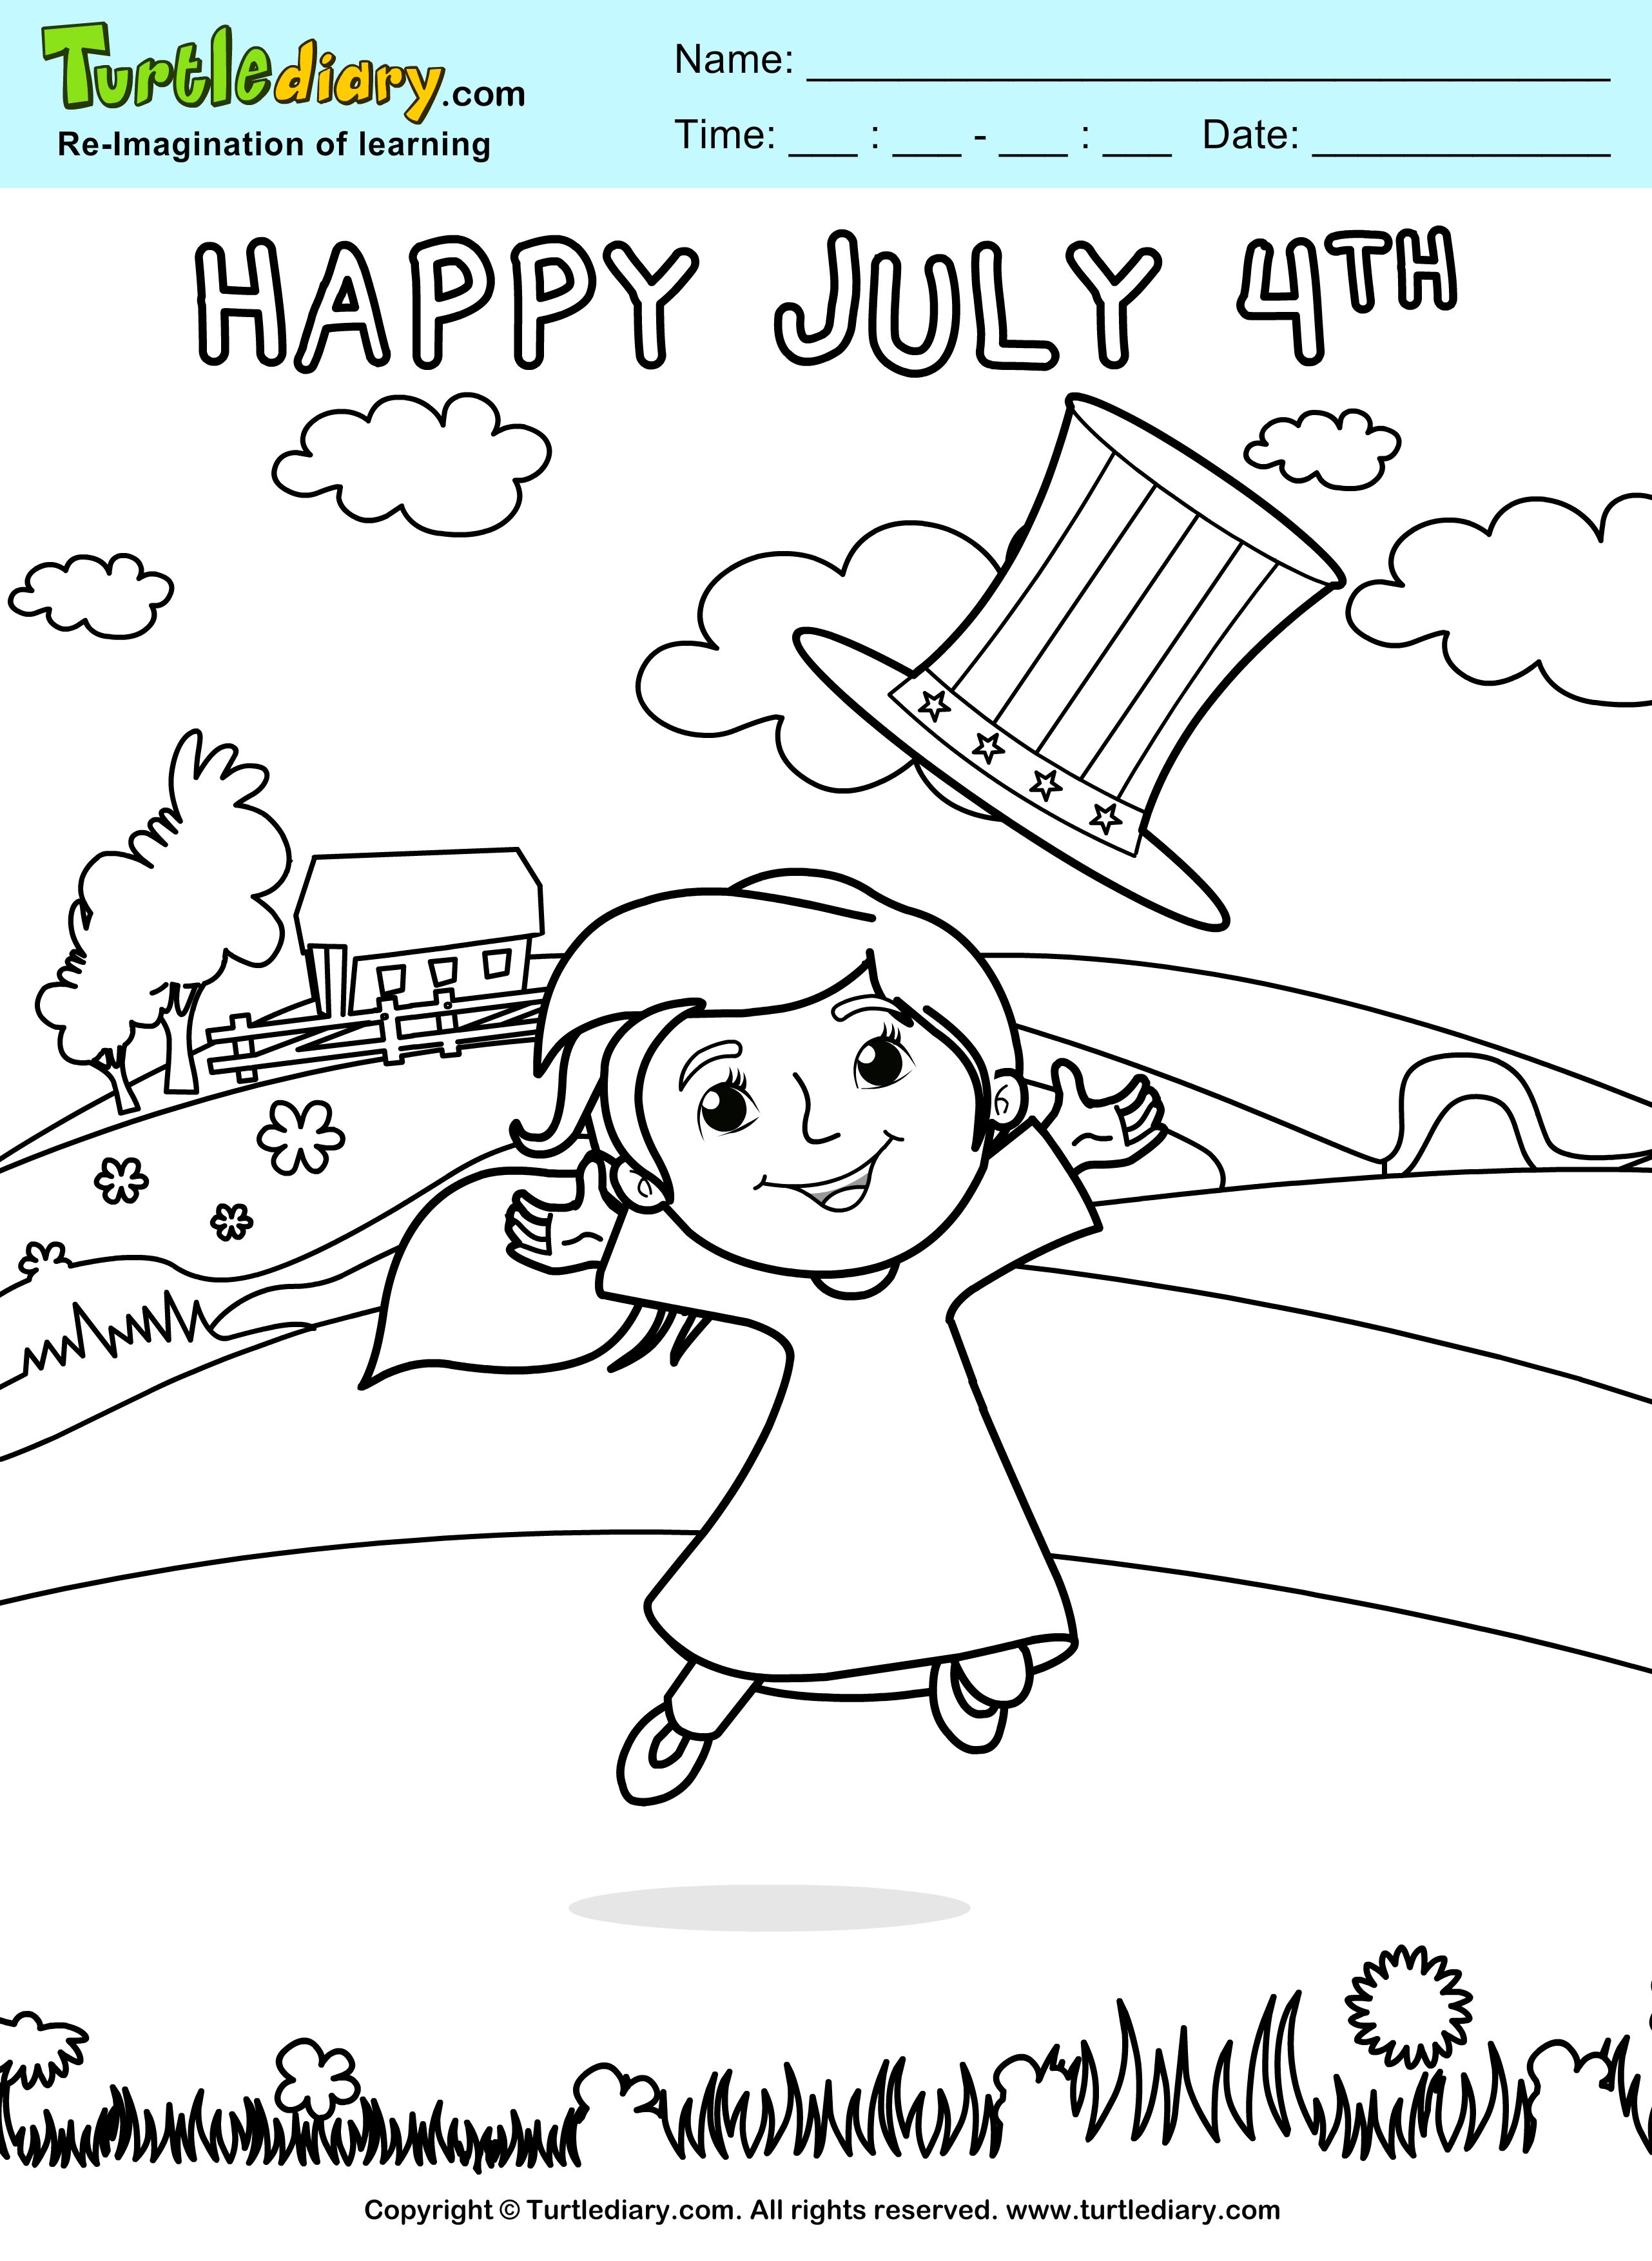 
Happy July 4th Printable Coloring Page